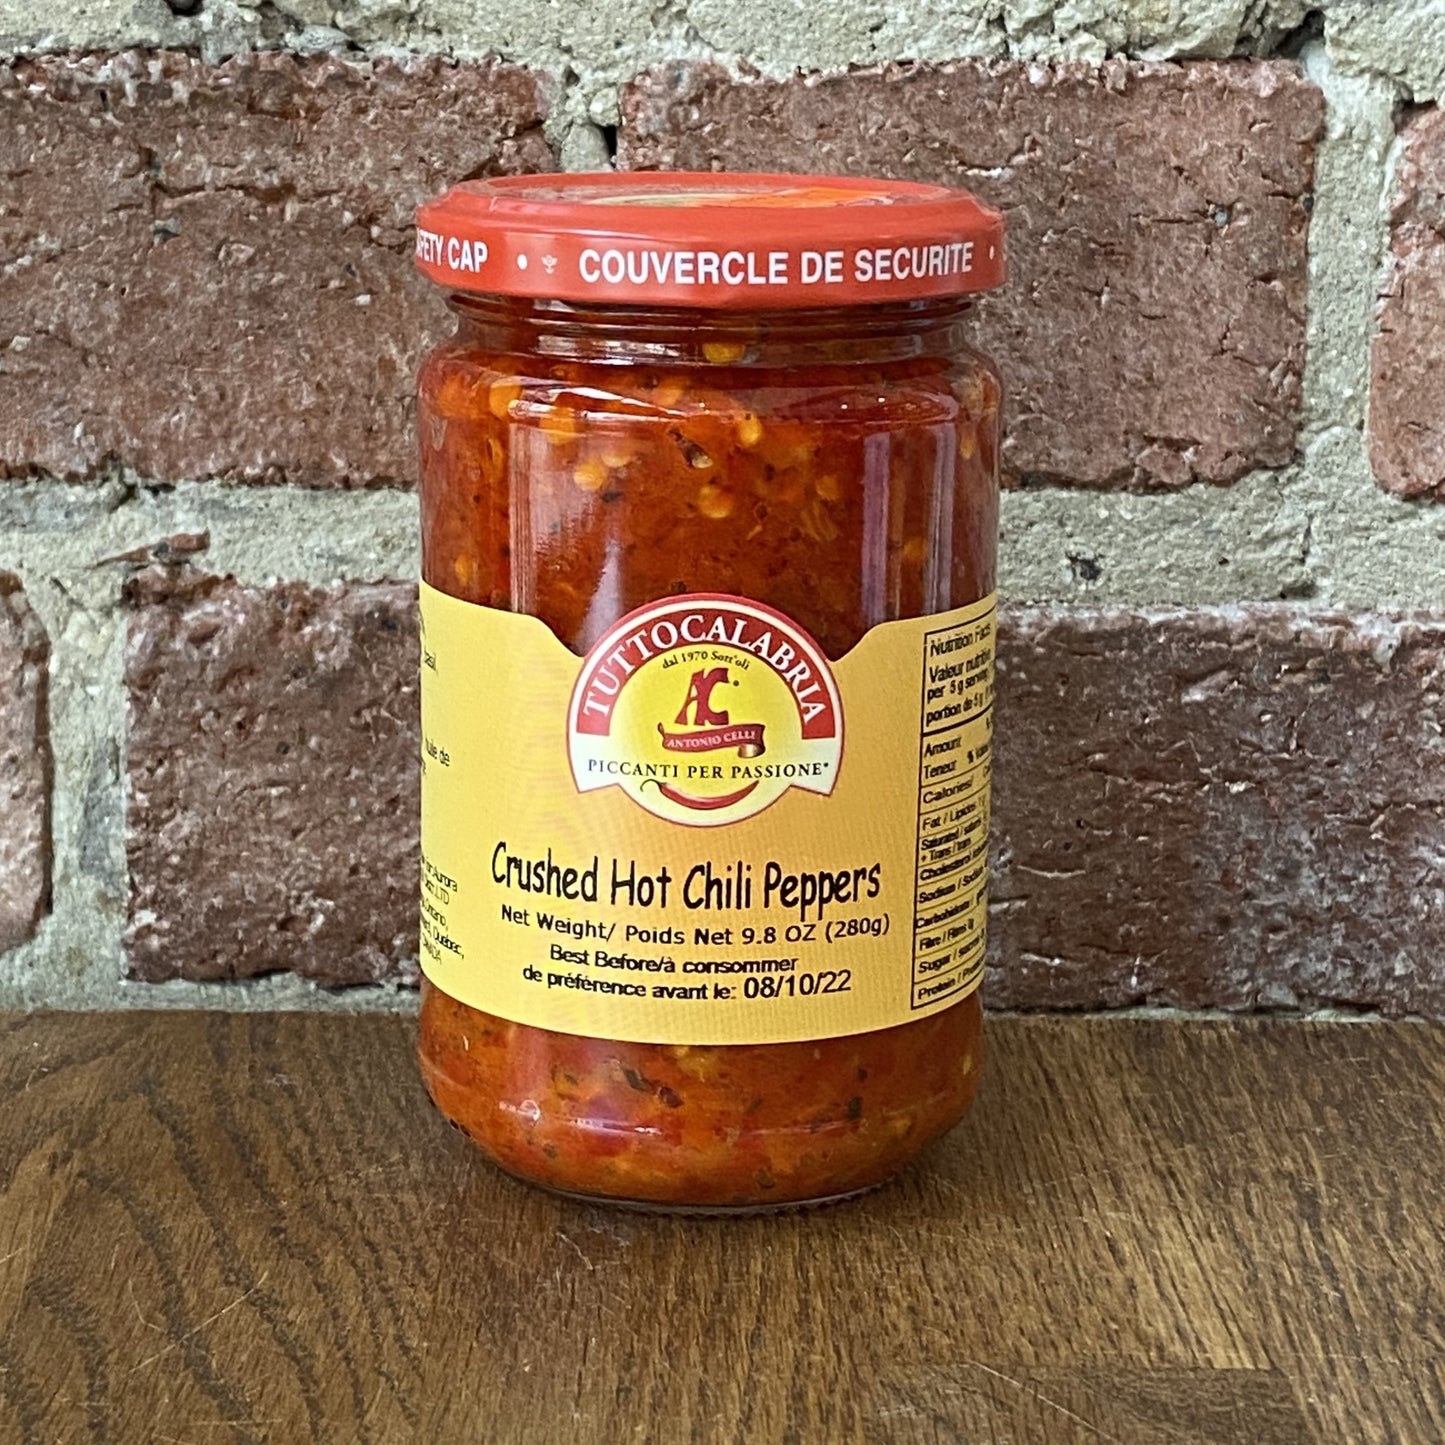 Crushed Hot Chili Peppers - 280g